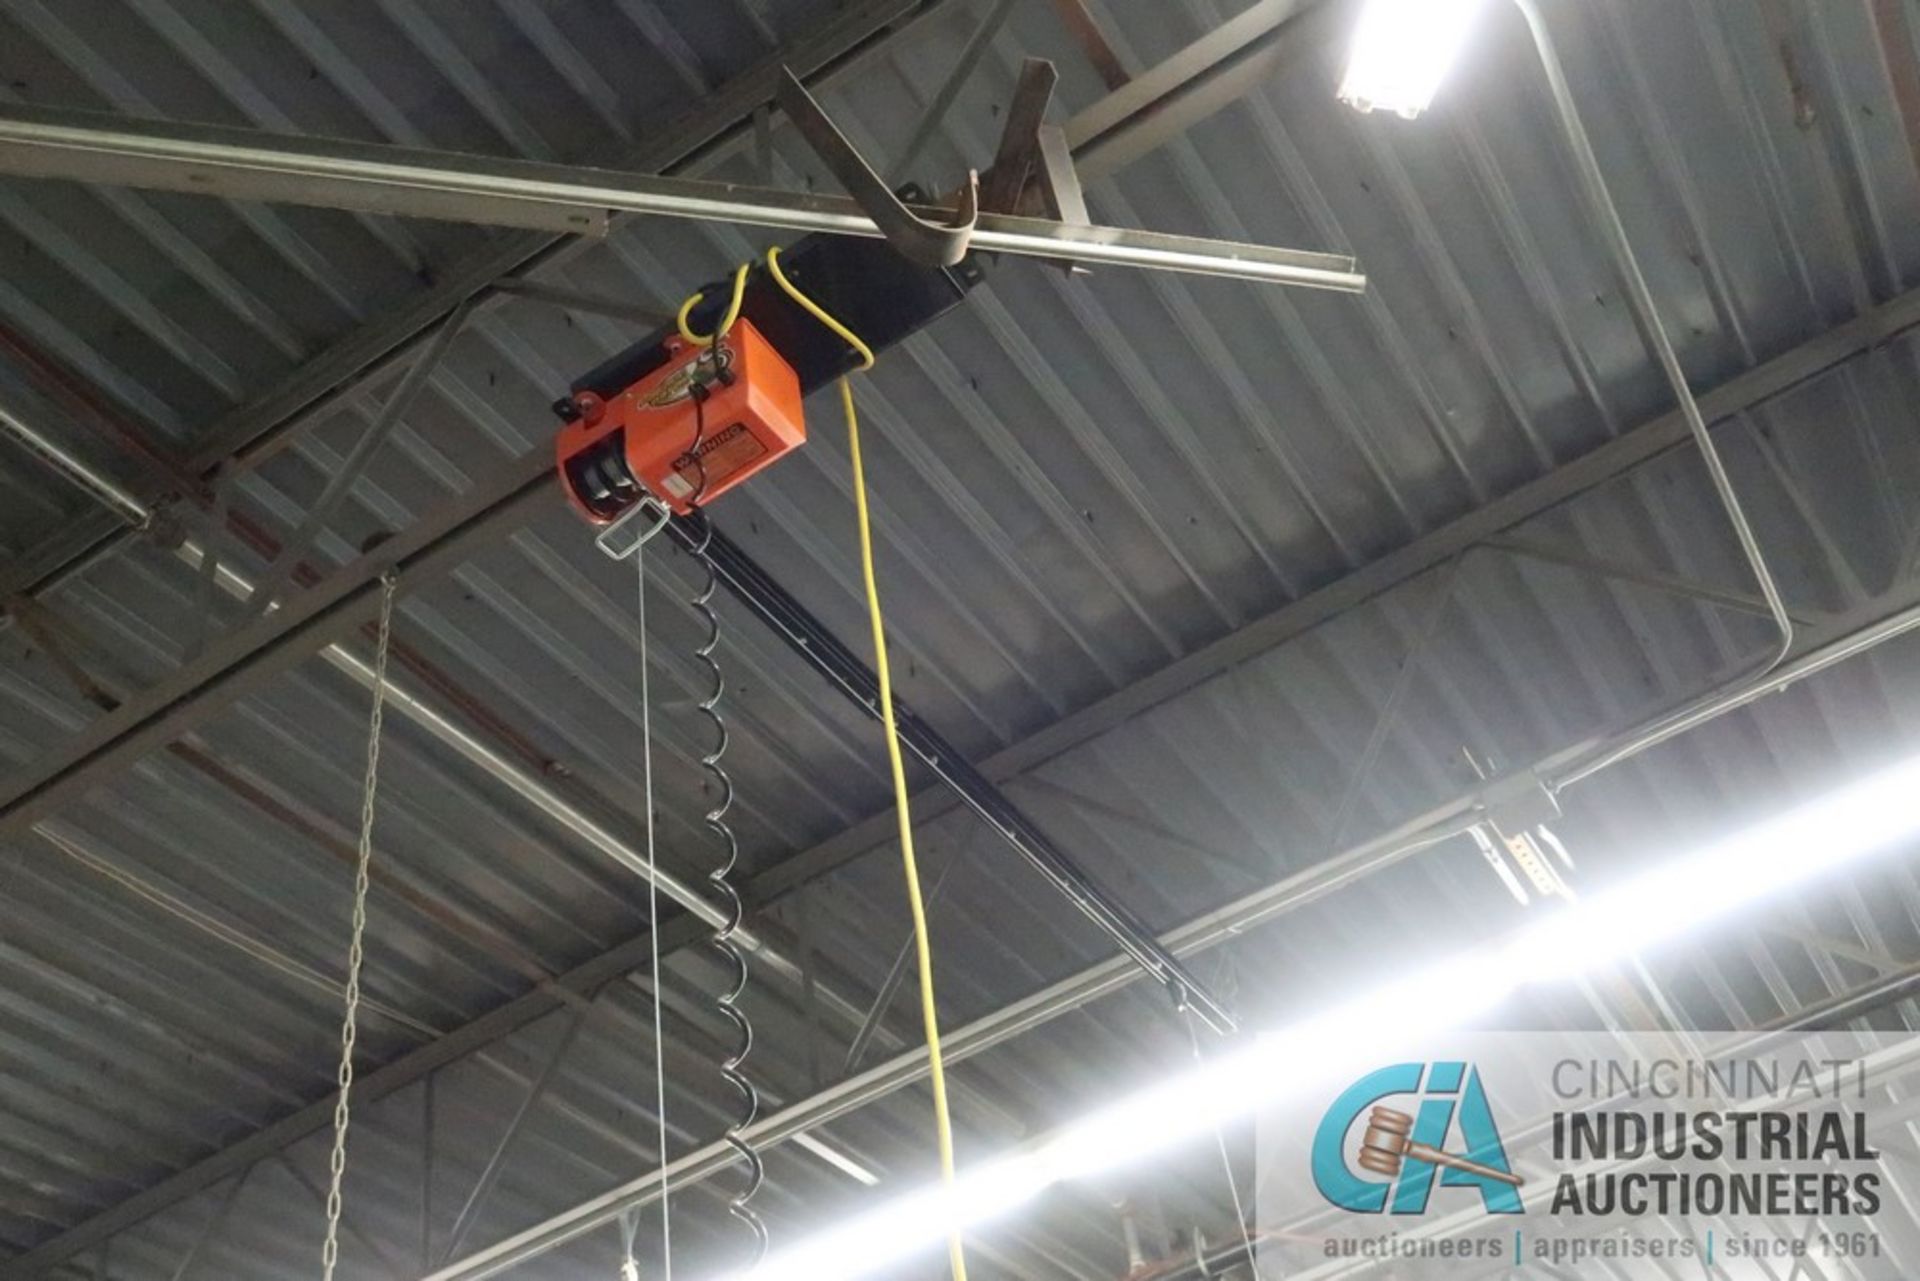 220 LB. GARAGE GATOR ELECTRIC CABLE LIFT WITH 3' X 6' PLATFORM, GGR3672PS - Image 2 of 6